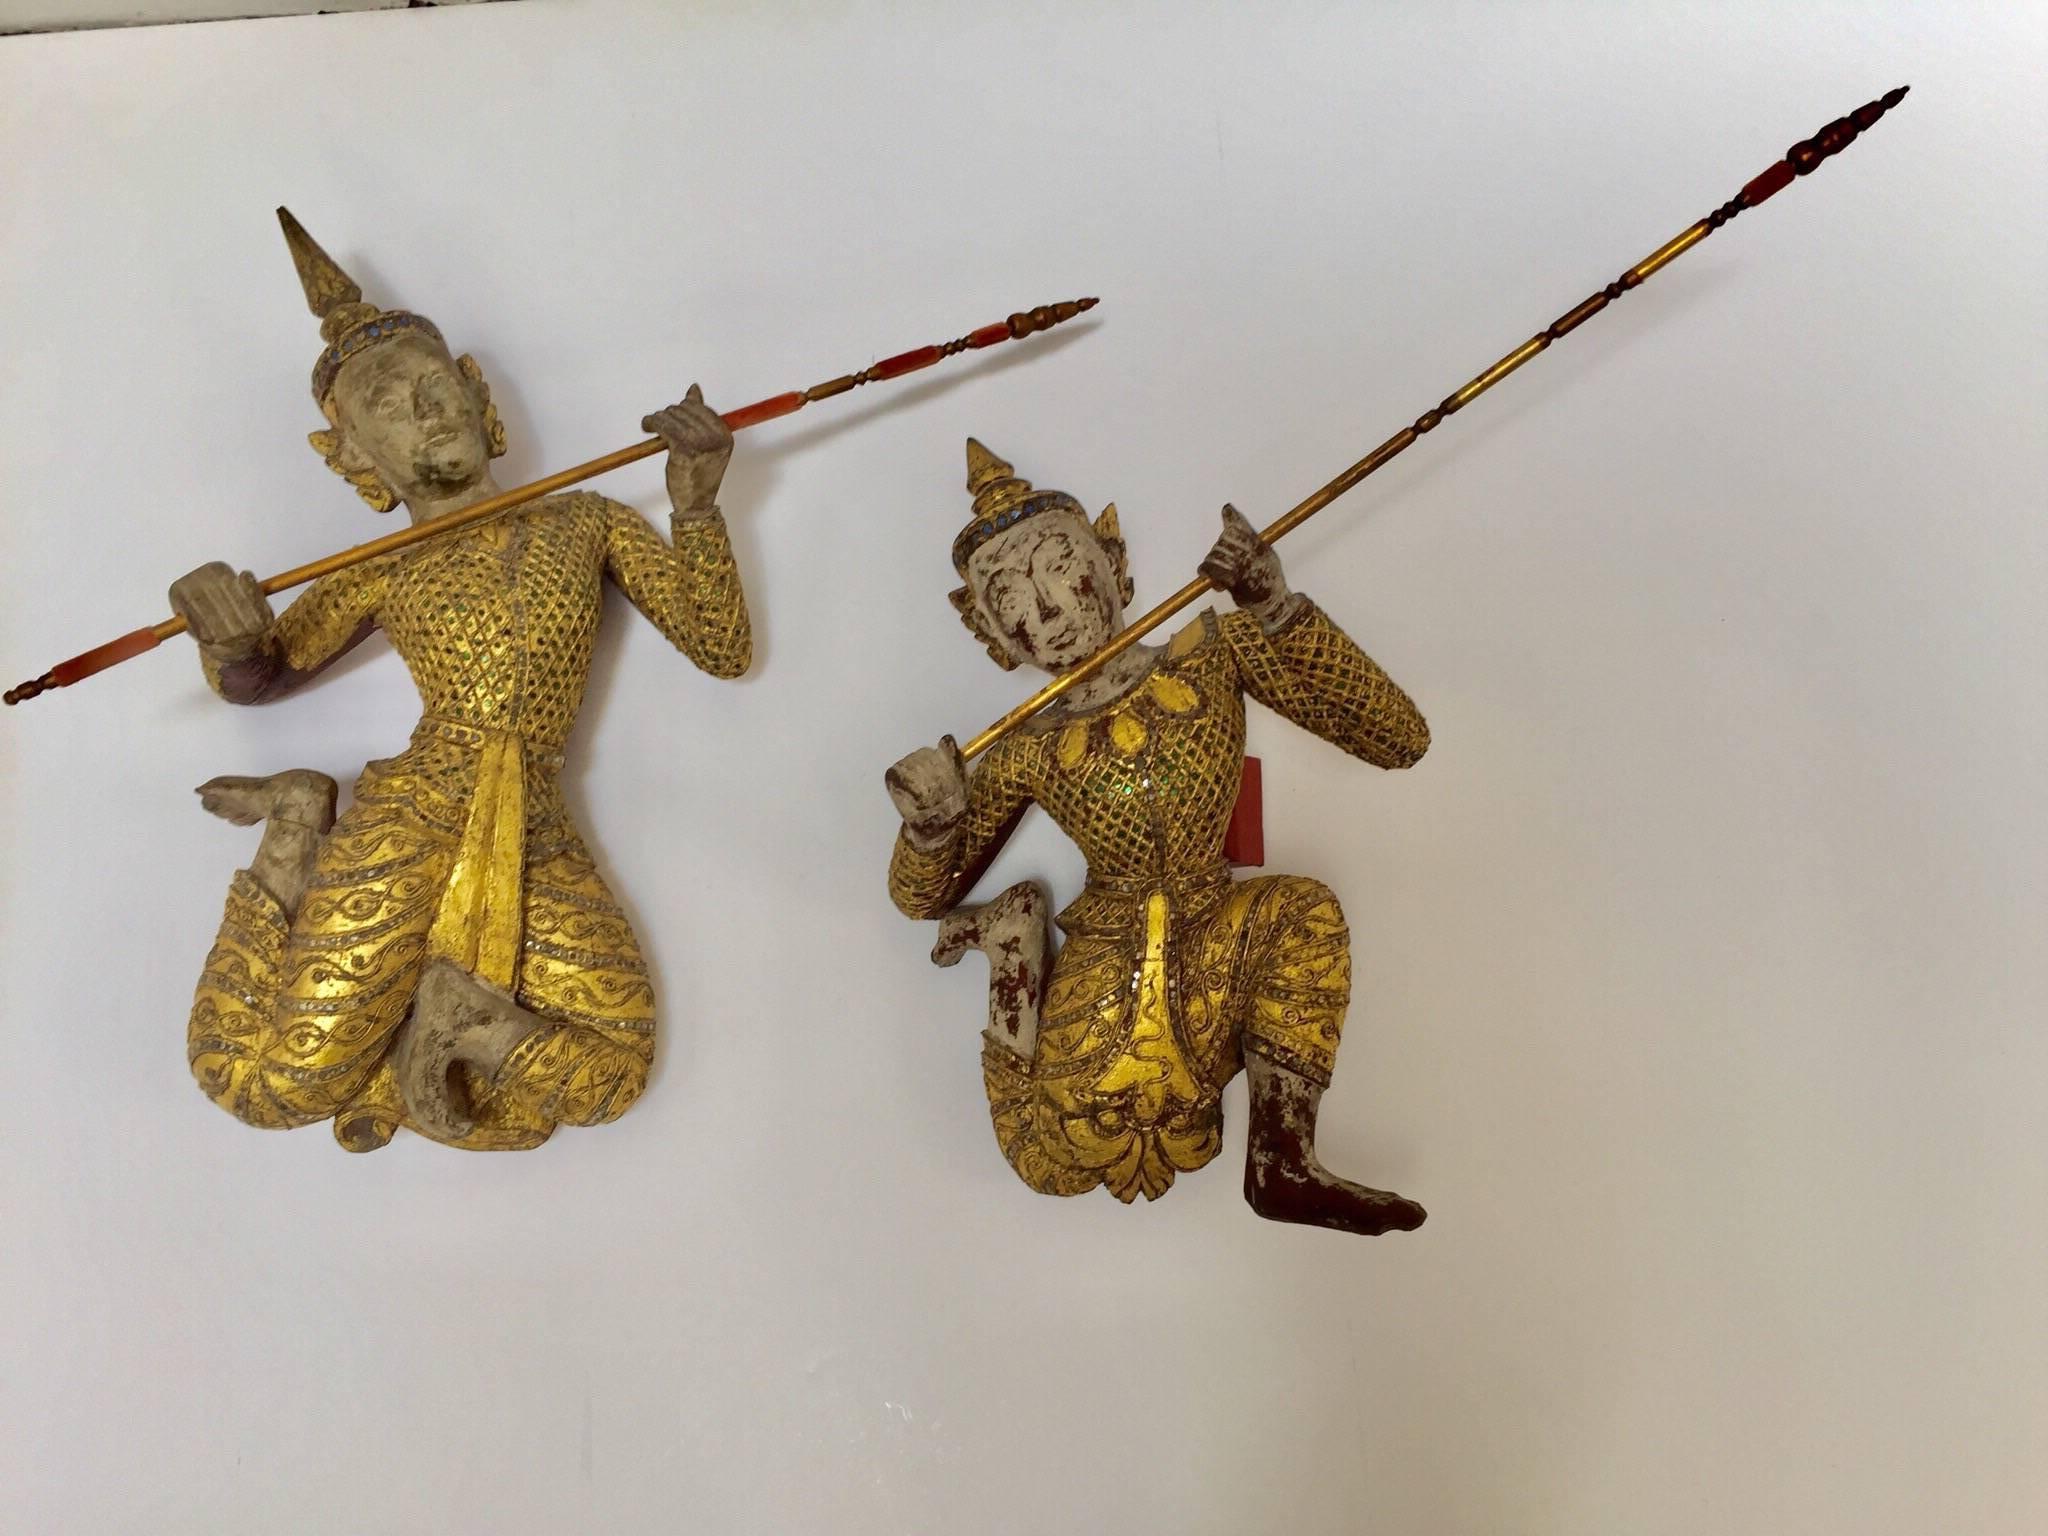 Large pair of Asian figures of Siamese dancers gilt wood sculpture, nicely carved.
Thai figure sculpture in seated position holding a spear, gilt over red lacquer that can be seen in the back.
Gold gilt adorned with green and clear mirrored gem